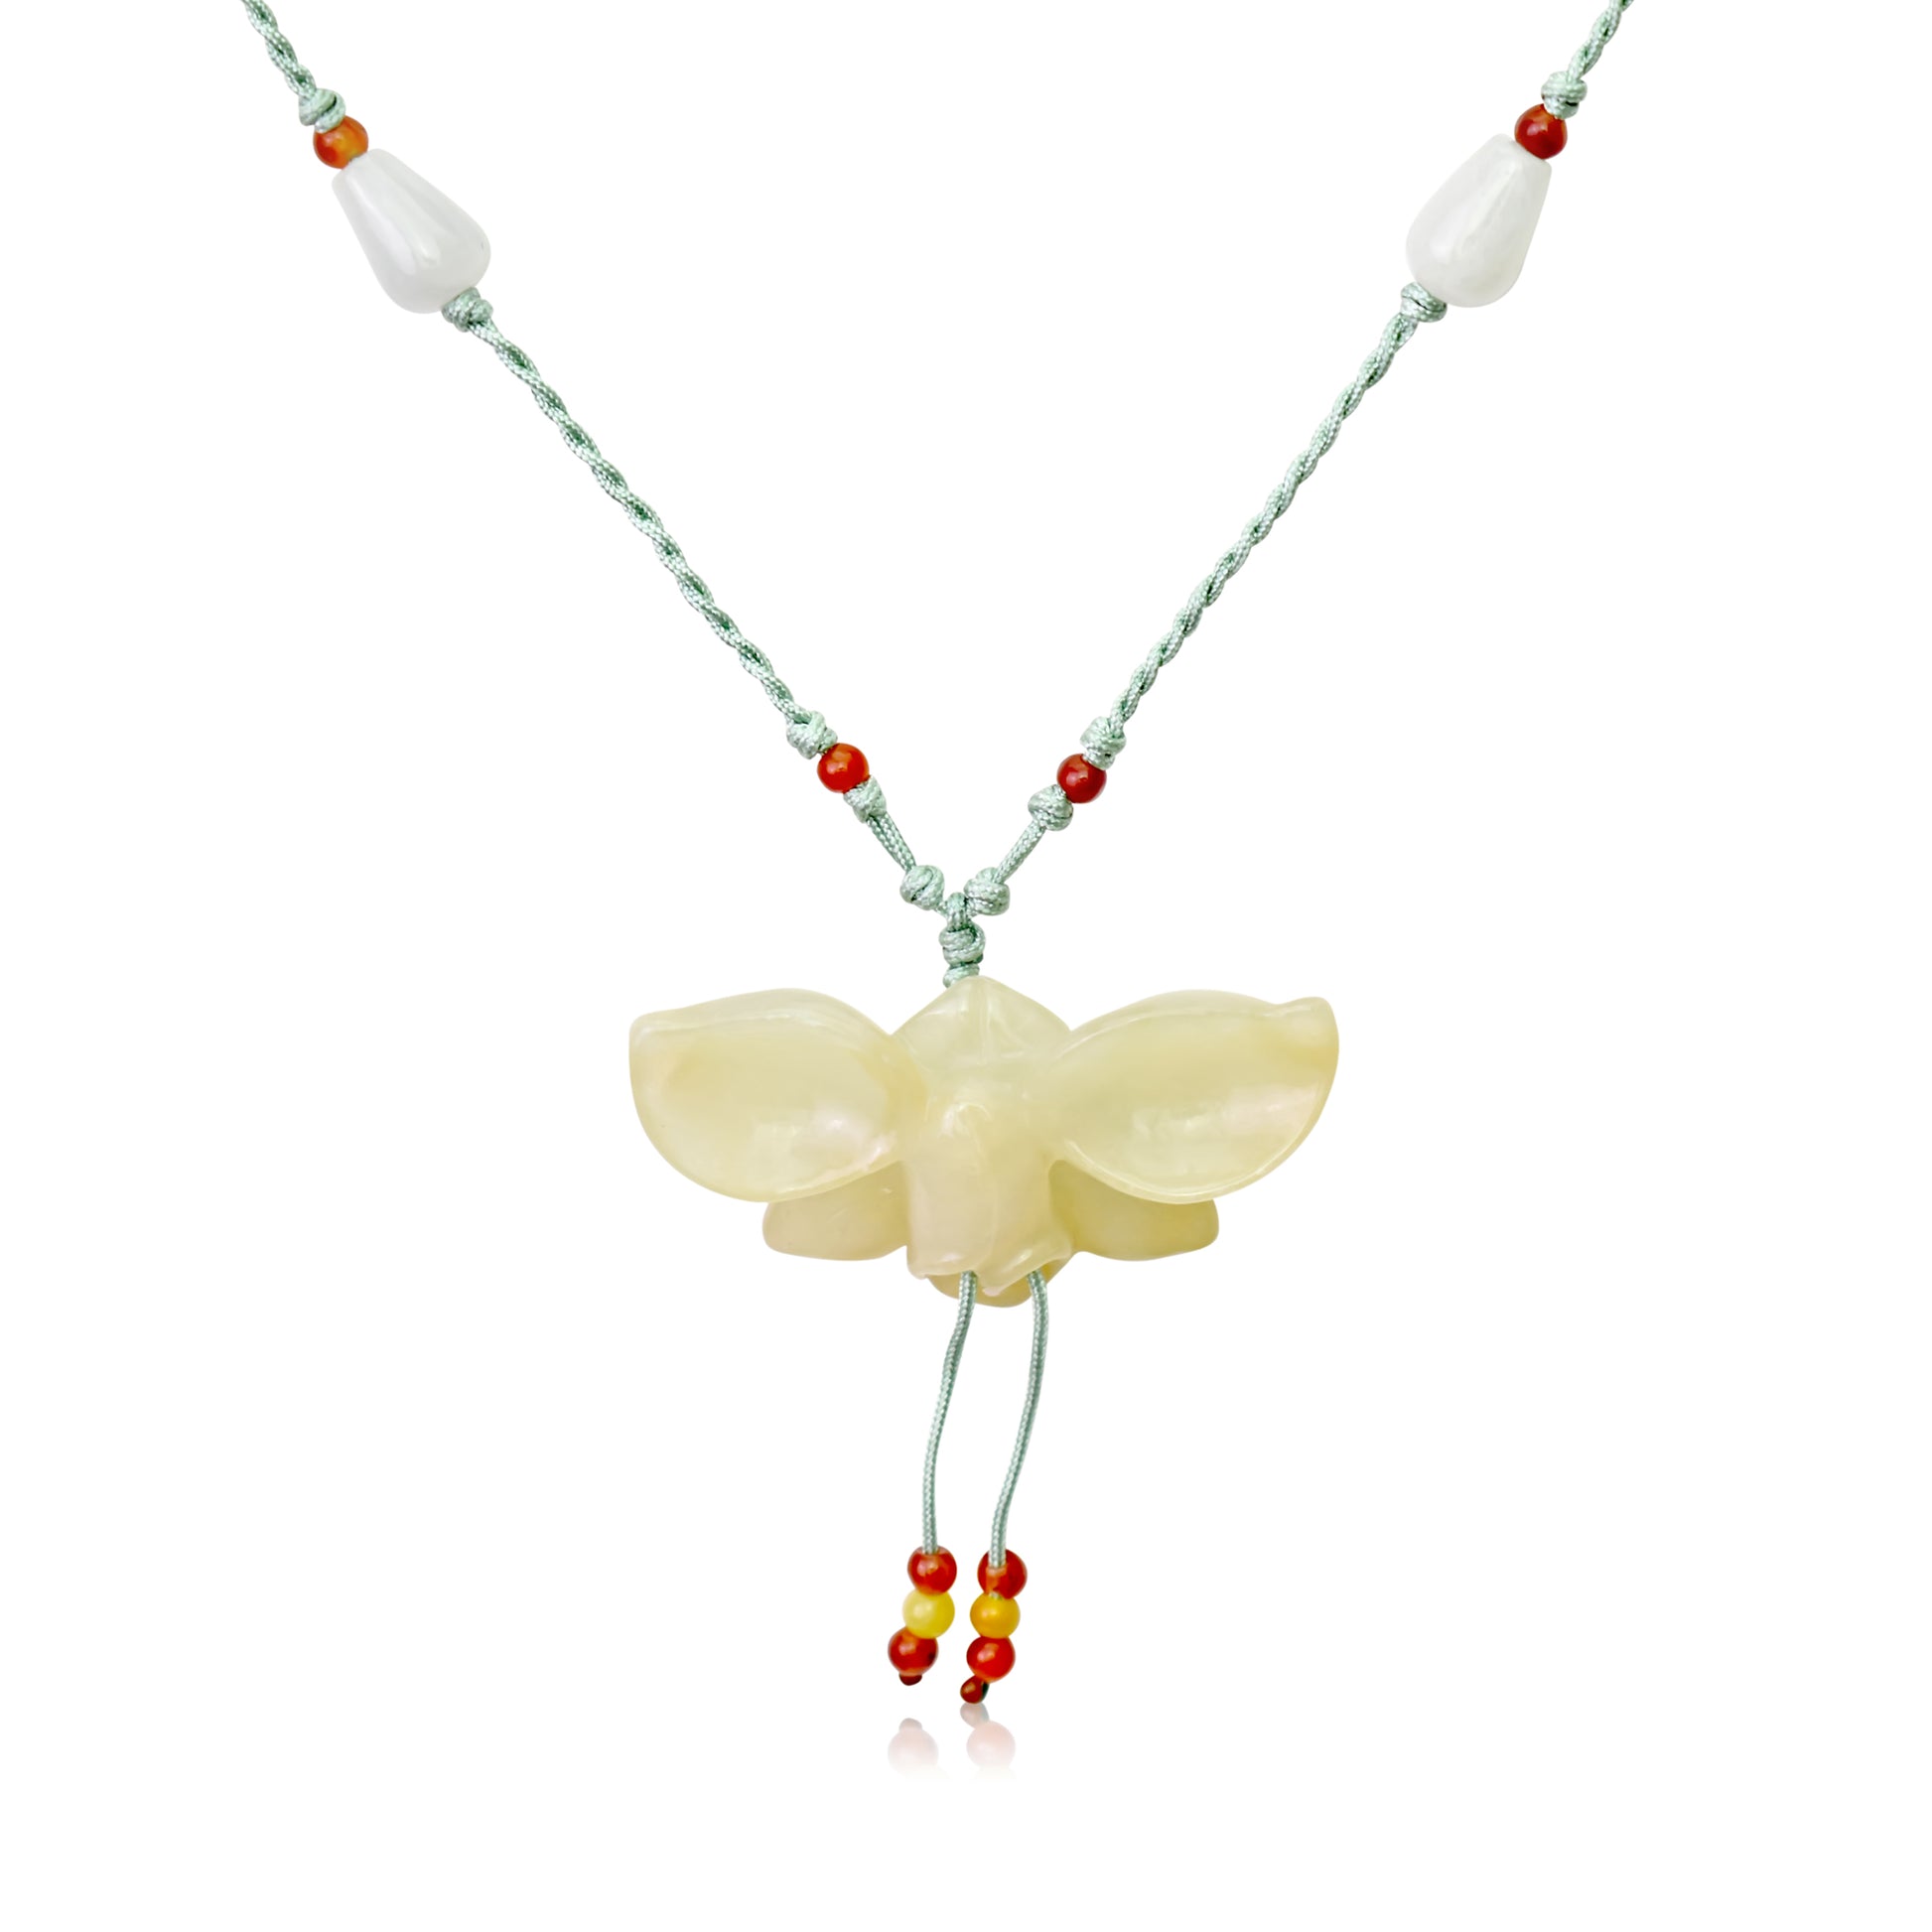 Discover Your Inner Beauty with the Butterfly Orchid Necklace